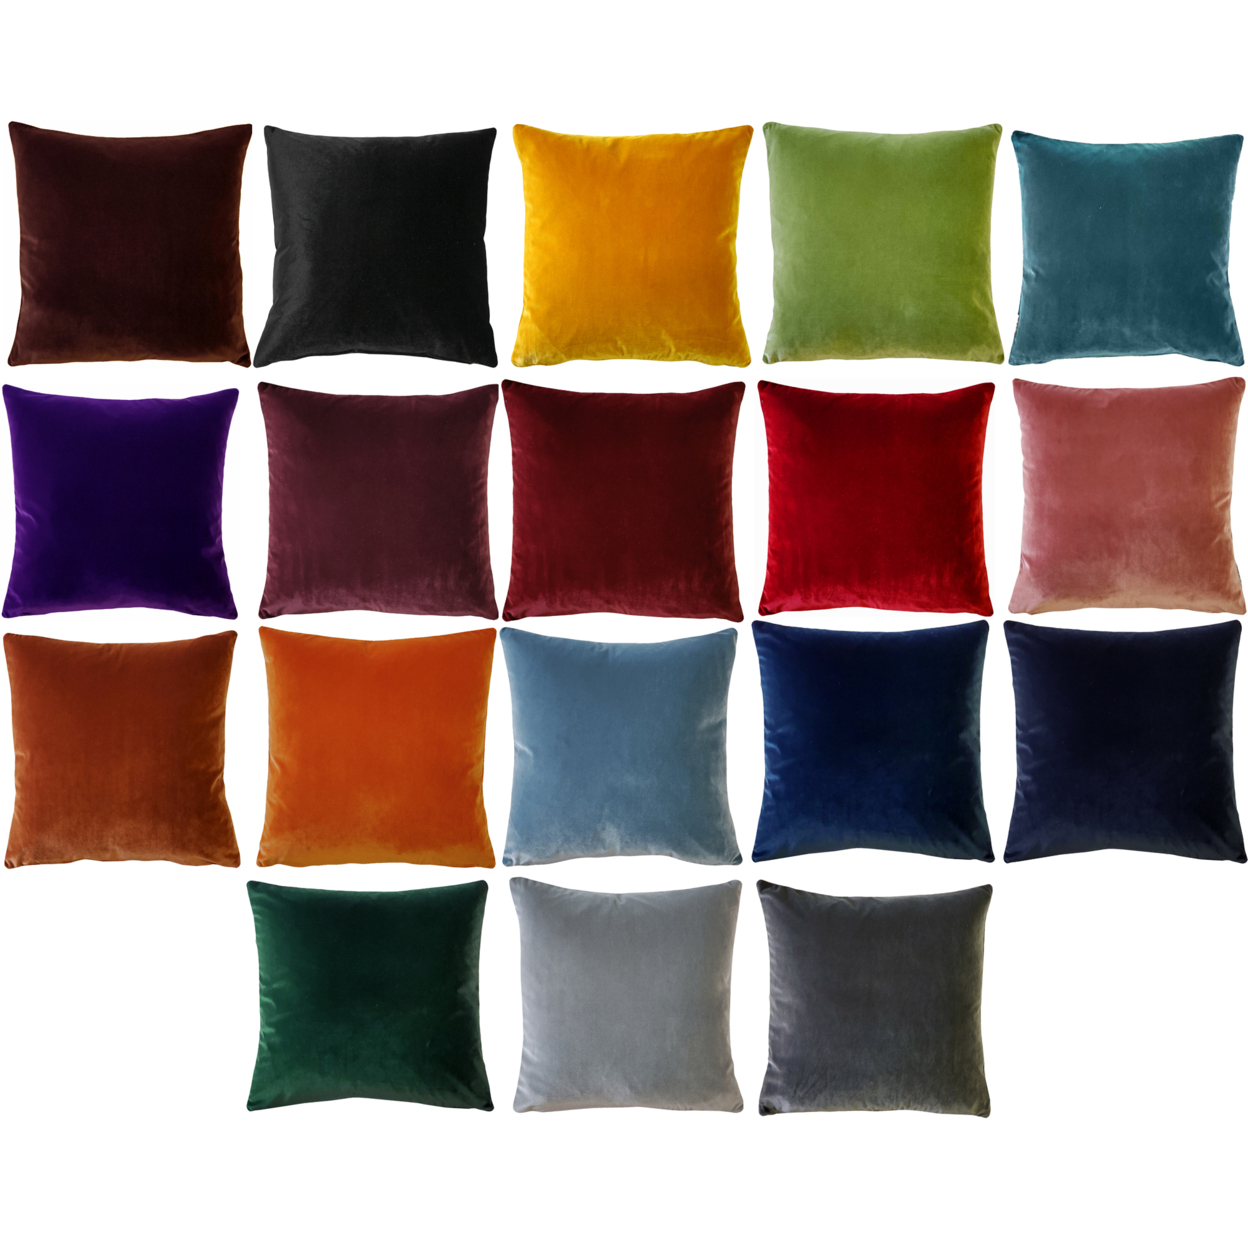 Castello Velvet Throw Pillows, Complete Pillow With Polyfill Pillow Insert (18 Colors, 3 Sizes) - Forest Green, 12x20